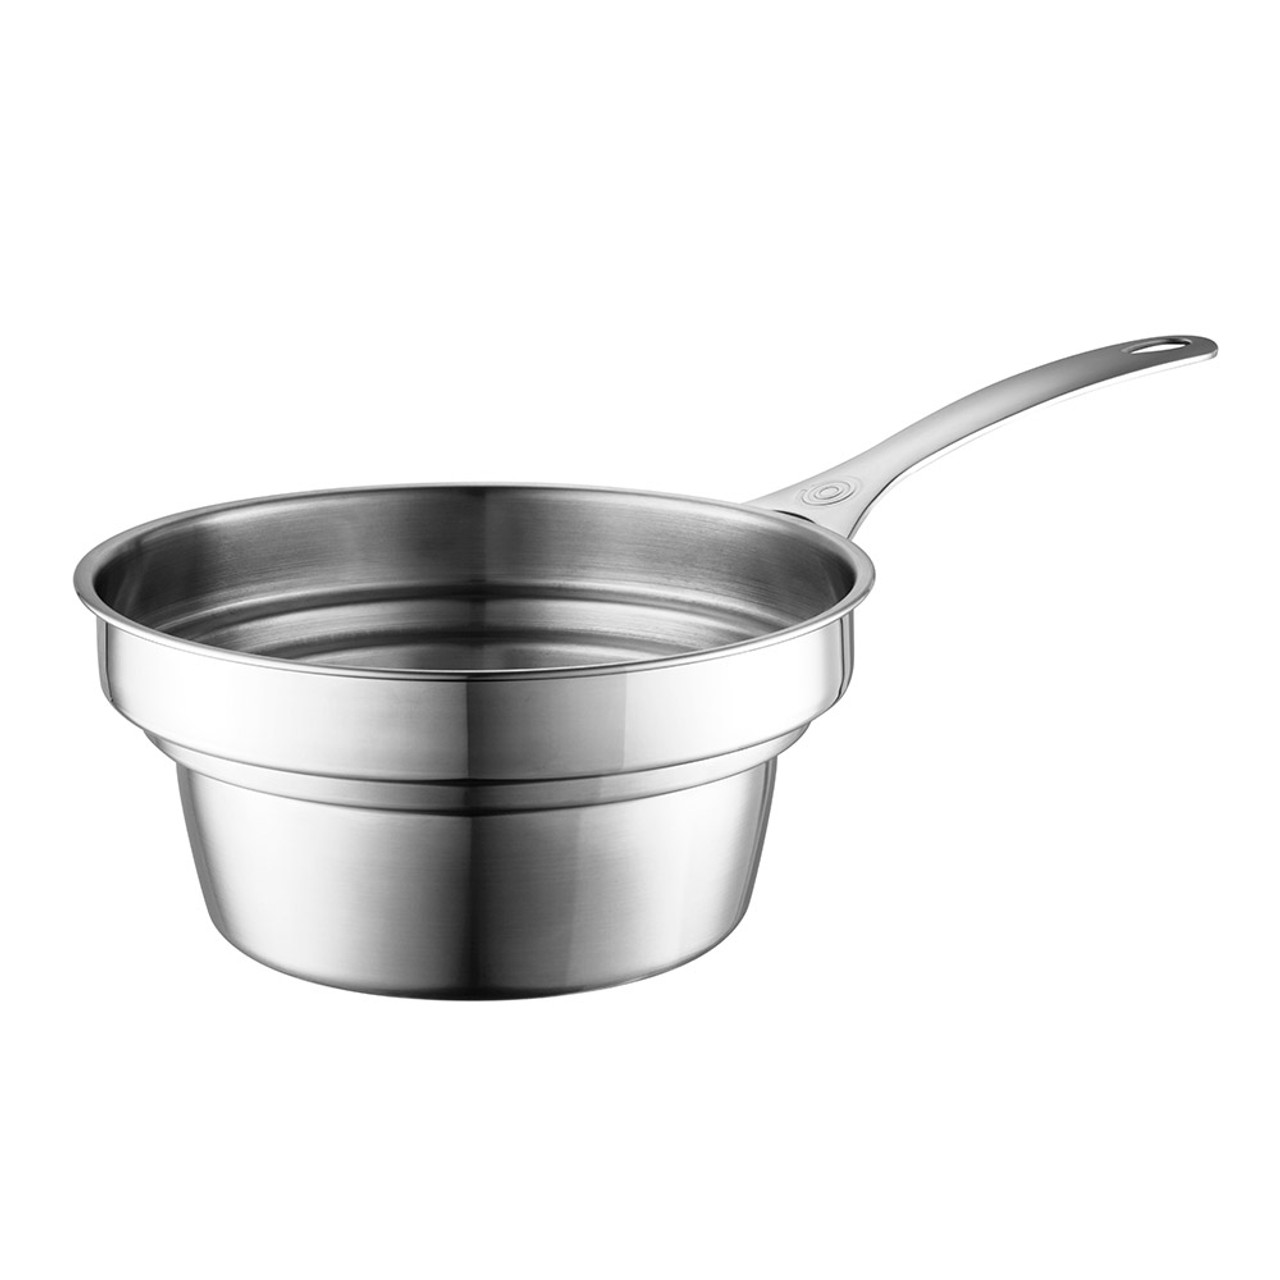 https://cdn11.bigcommerce.com/s-hccytny0od/images/stencil/1280x1280/products/1462/5068/le-creuset-stainless-steel-double-boiler-insert__20511.1585961073.jpg?c=2?imbypass=on